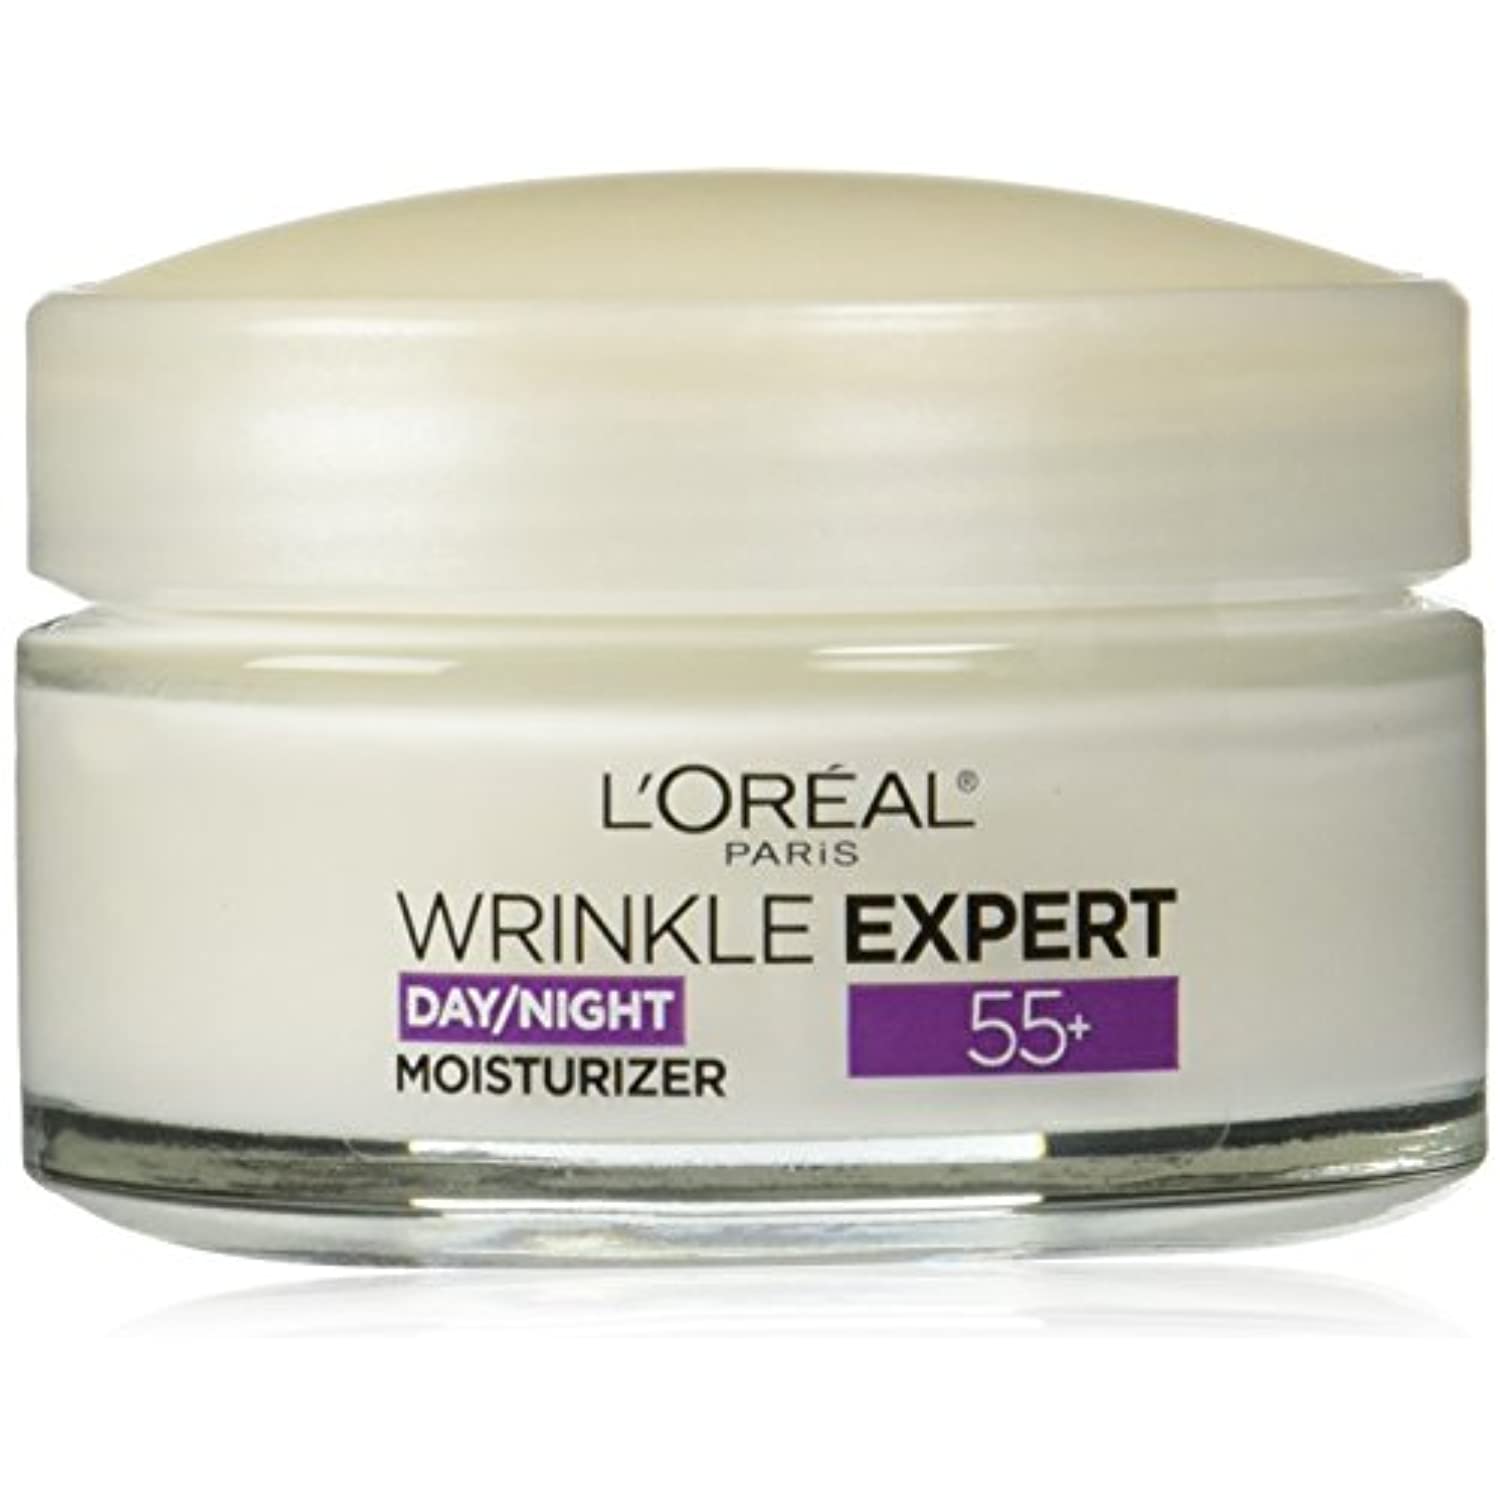 Loreal Paris Skincare Wrinkle Expert 55+ Anti-Aging Face Moisturizer With Calcium Non-Greasy Suitable For Sensitive Skin 1.7 Fl; Oz. - image 1 of 3